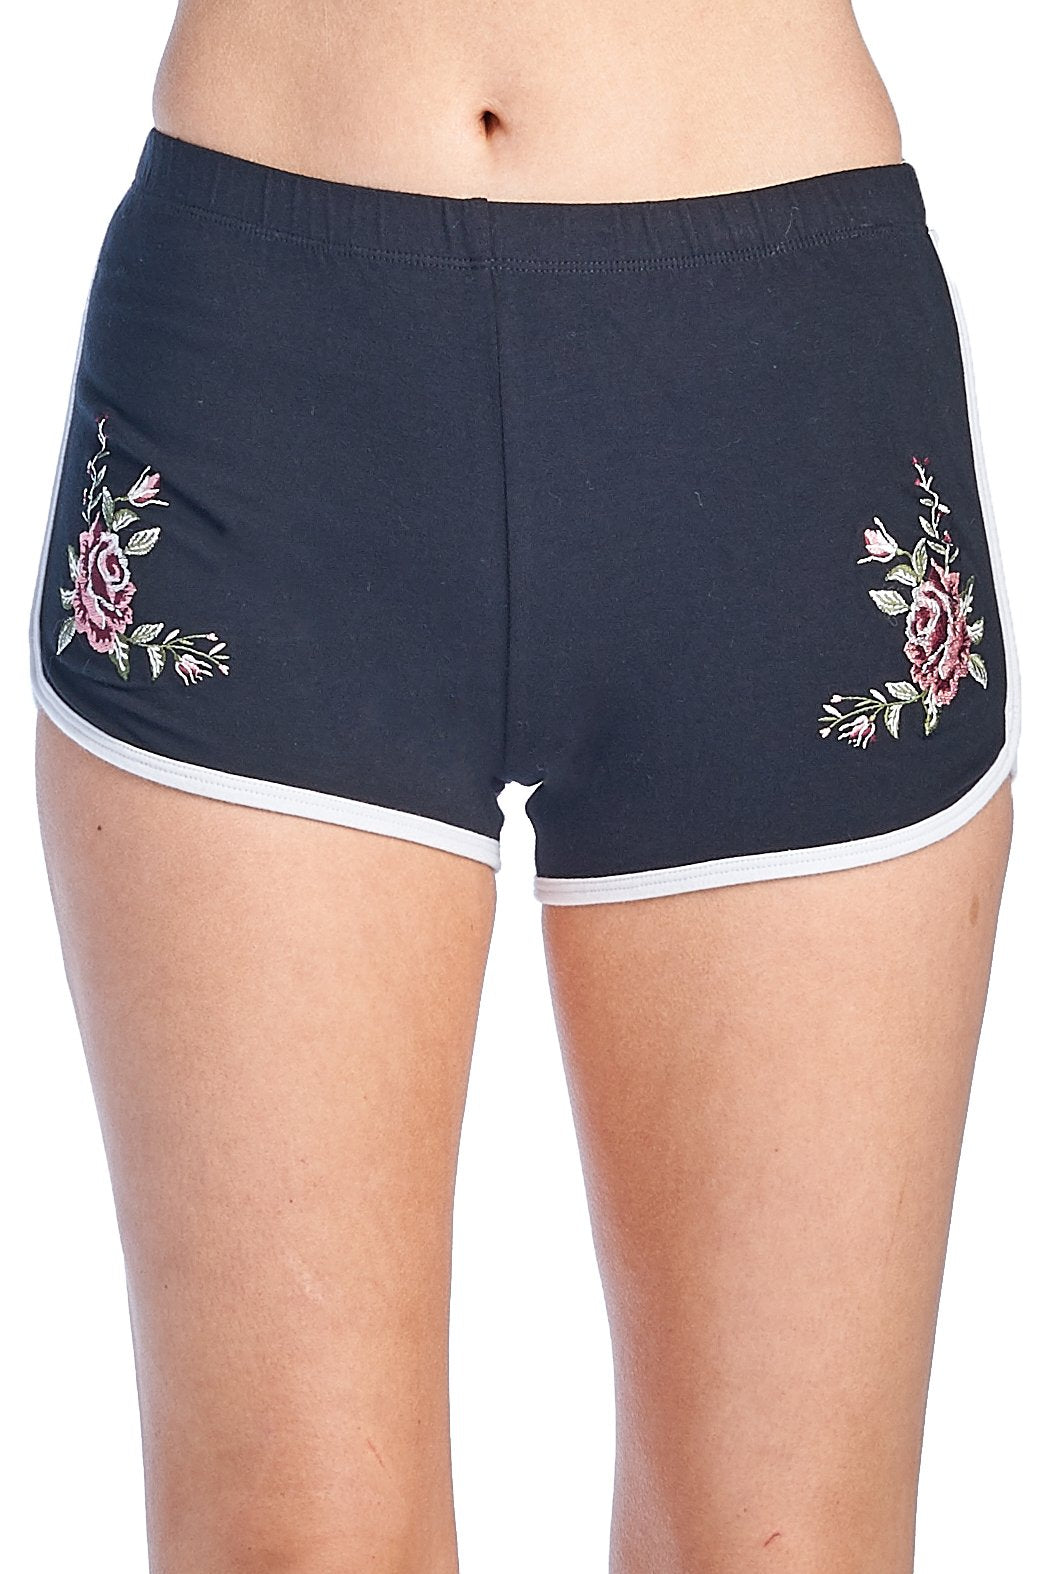 Women's Casual Basic Stretch Elastic Waist Floral Embroidery Floral Binding Dolphin Shorts